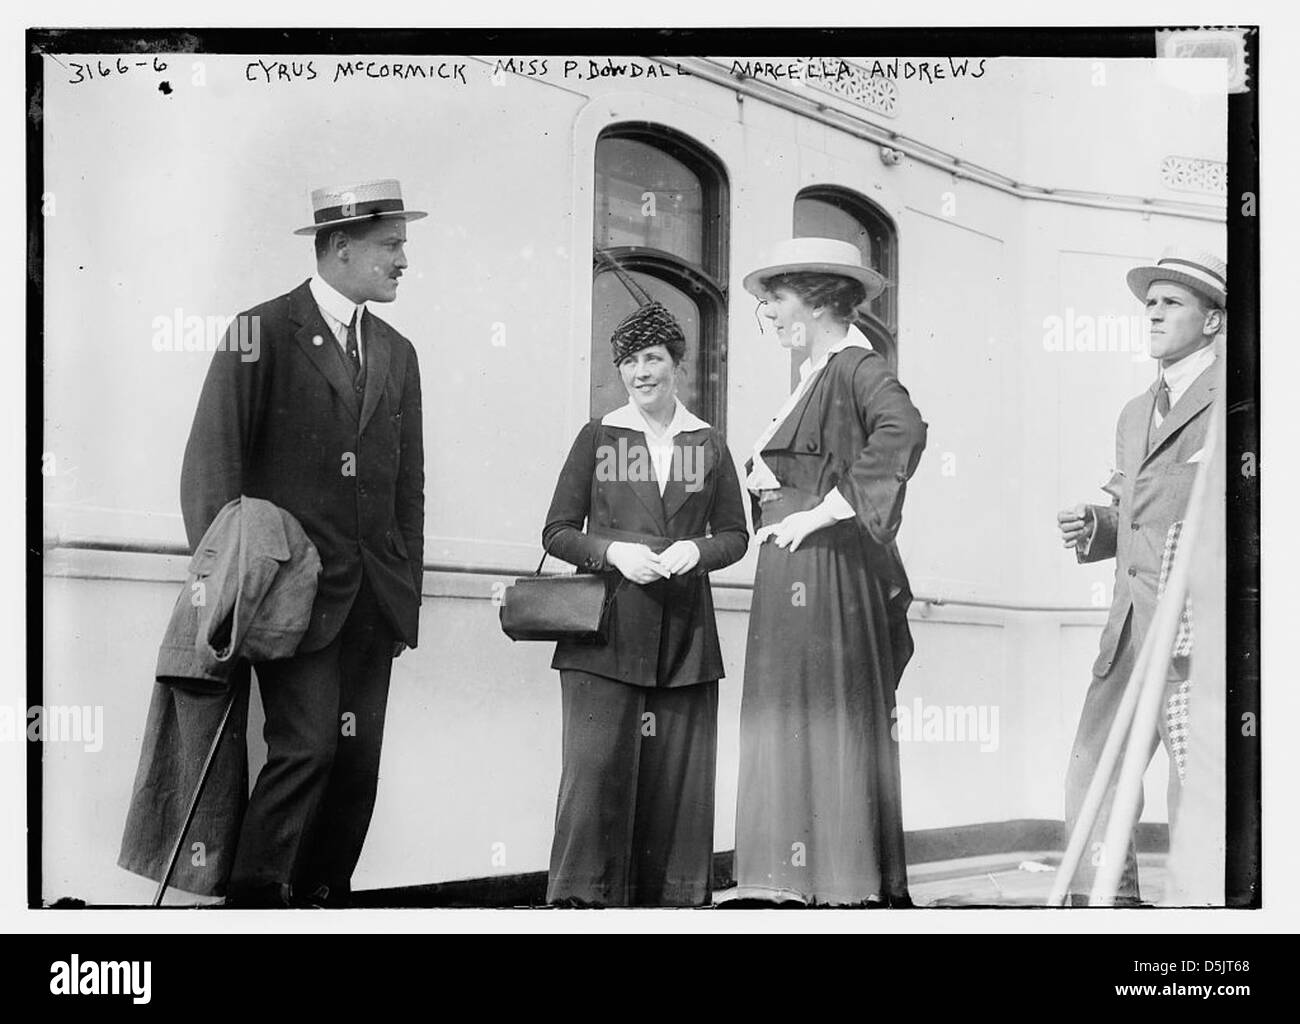 Cyrus McCormick -- Mlle P. Dowdall, Marcella Andrews (LOC) Banque D'Images